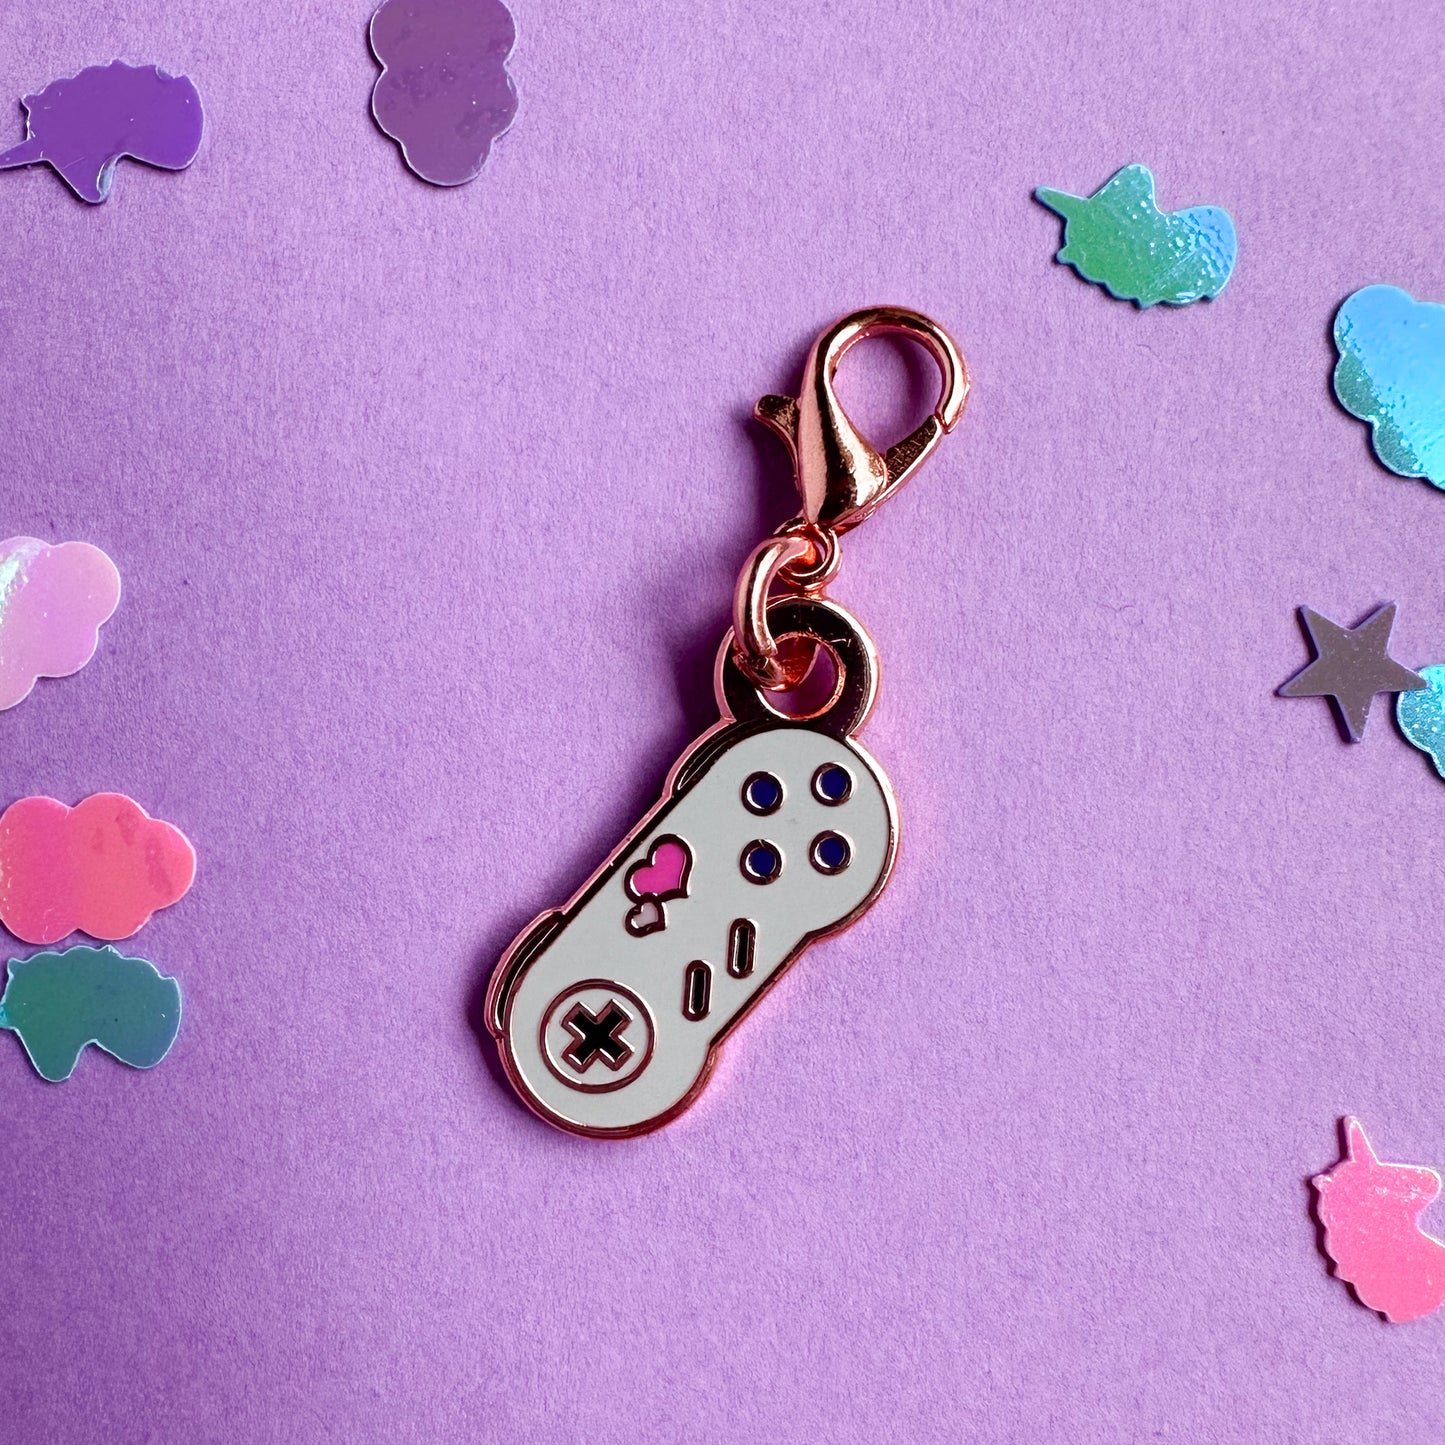 A lobster claw clasp charm shaped like a Super Nintendo controller with hearts on it. The charm is on a lavender confetti background.